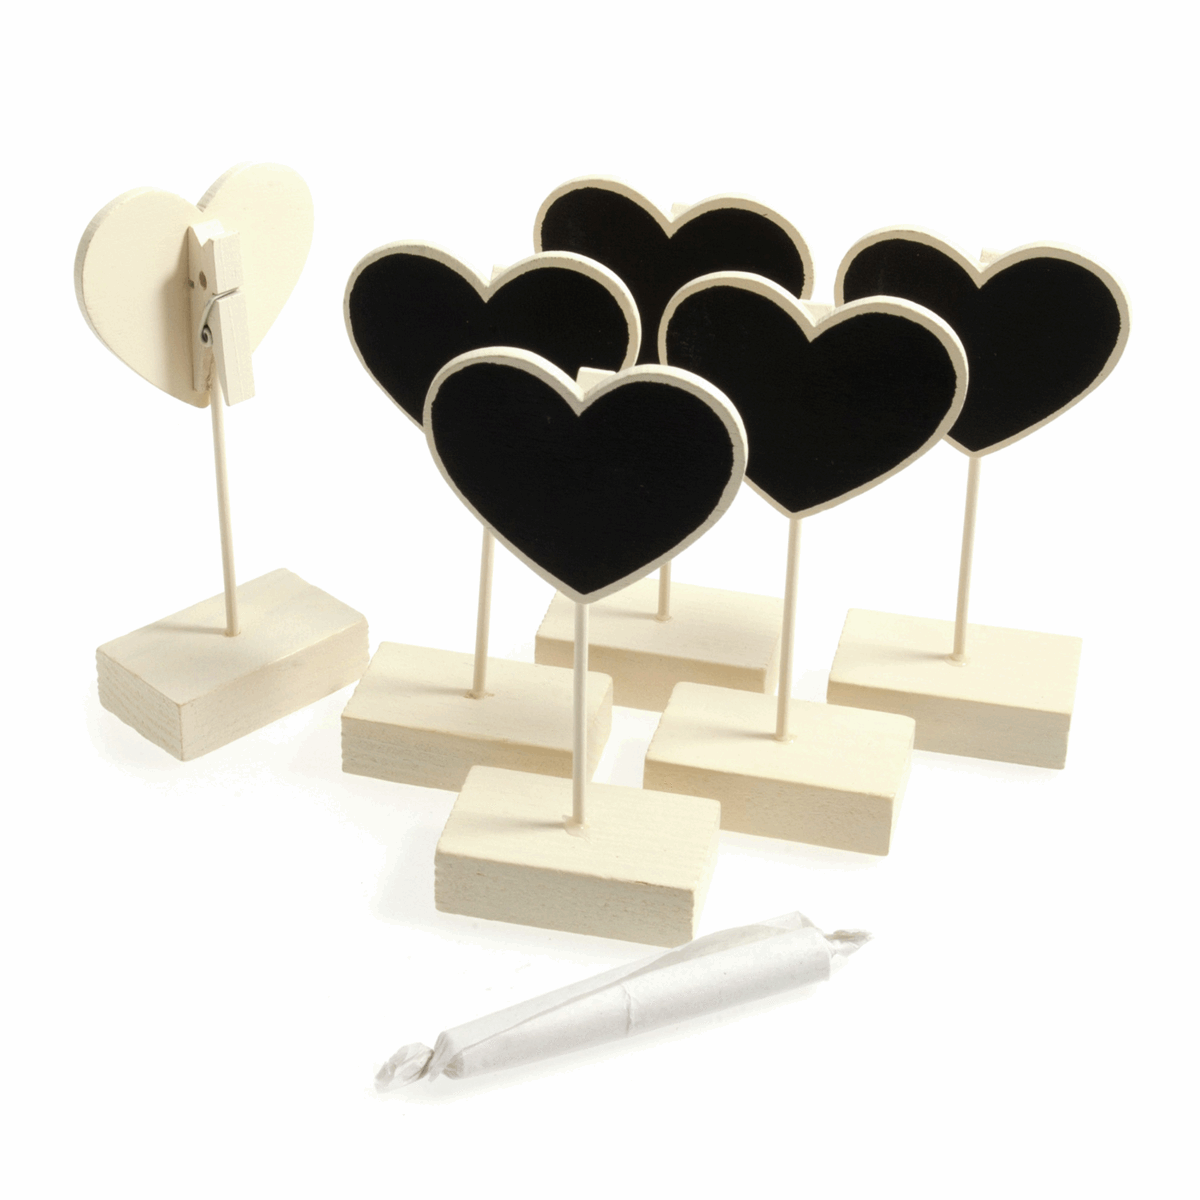 Ivory Heart Shape Chalk Board Card Holders with Pegs - 11 x 5cm (Pack of 6)